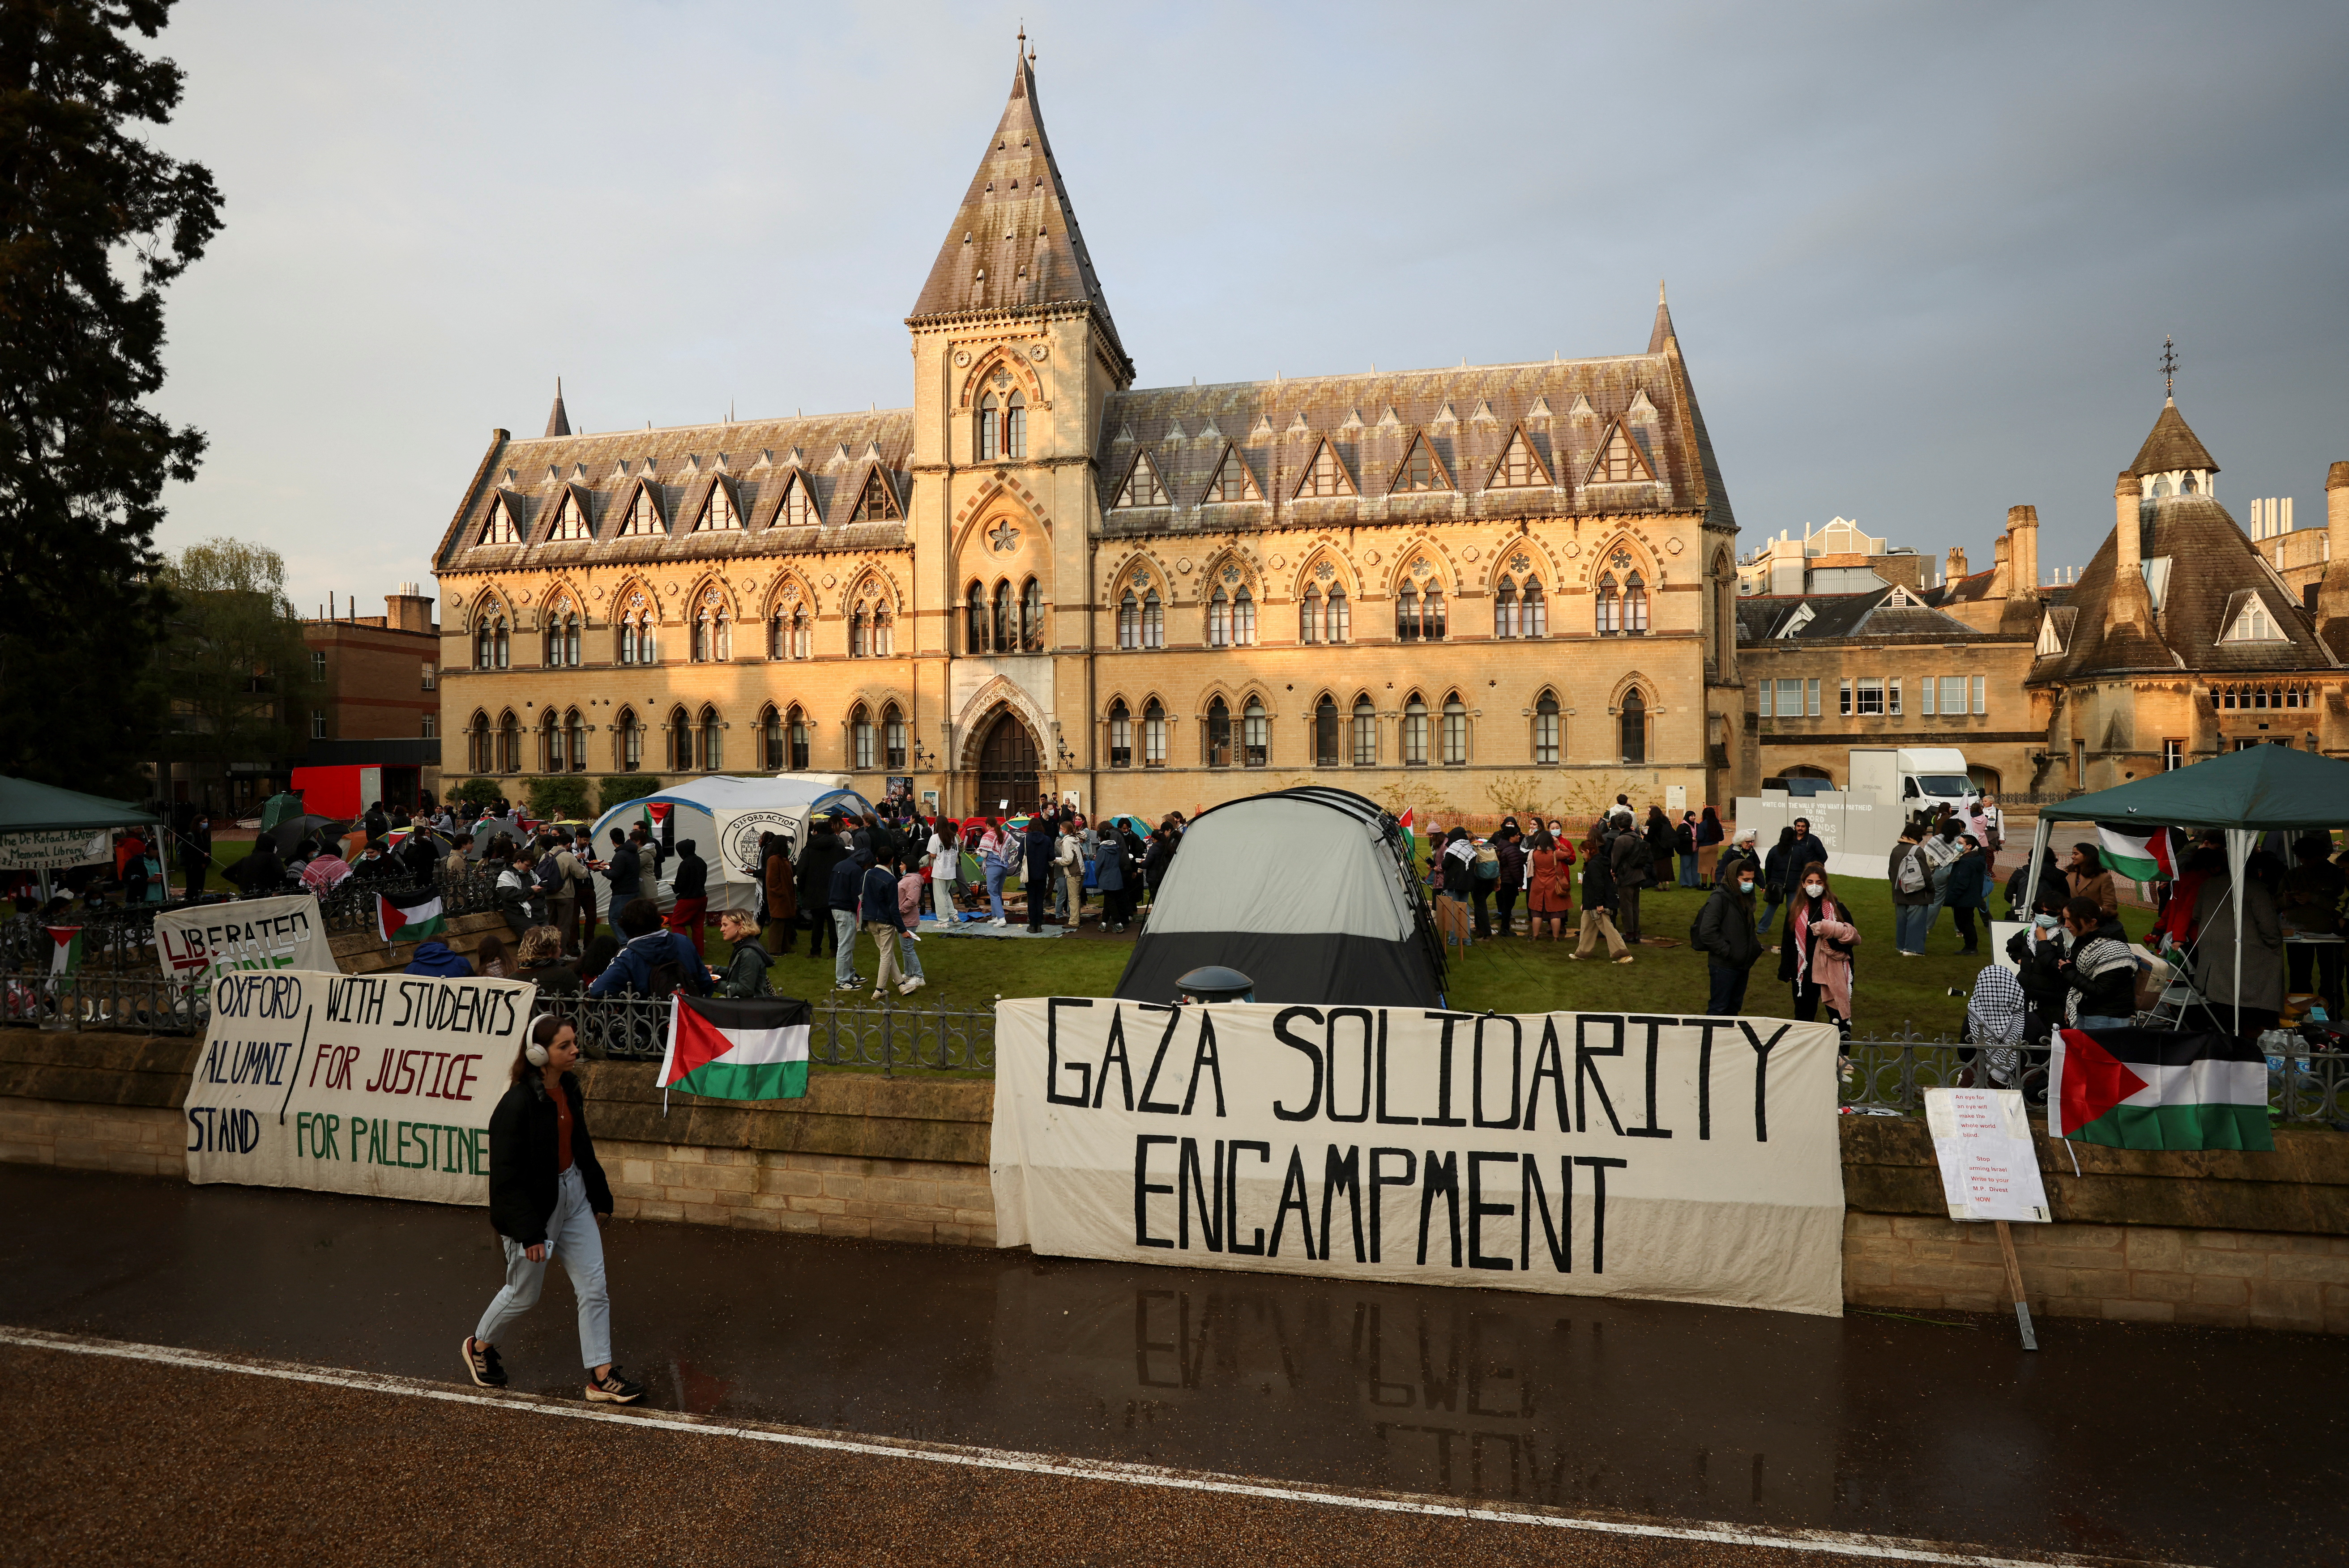 British students occupy university campuses in protest against conflict between Israel and Hamas, in Oxford